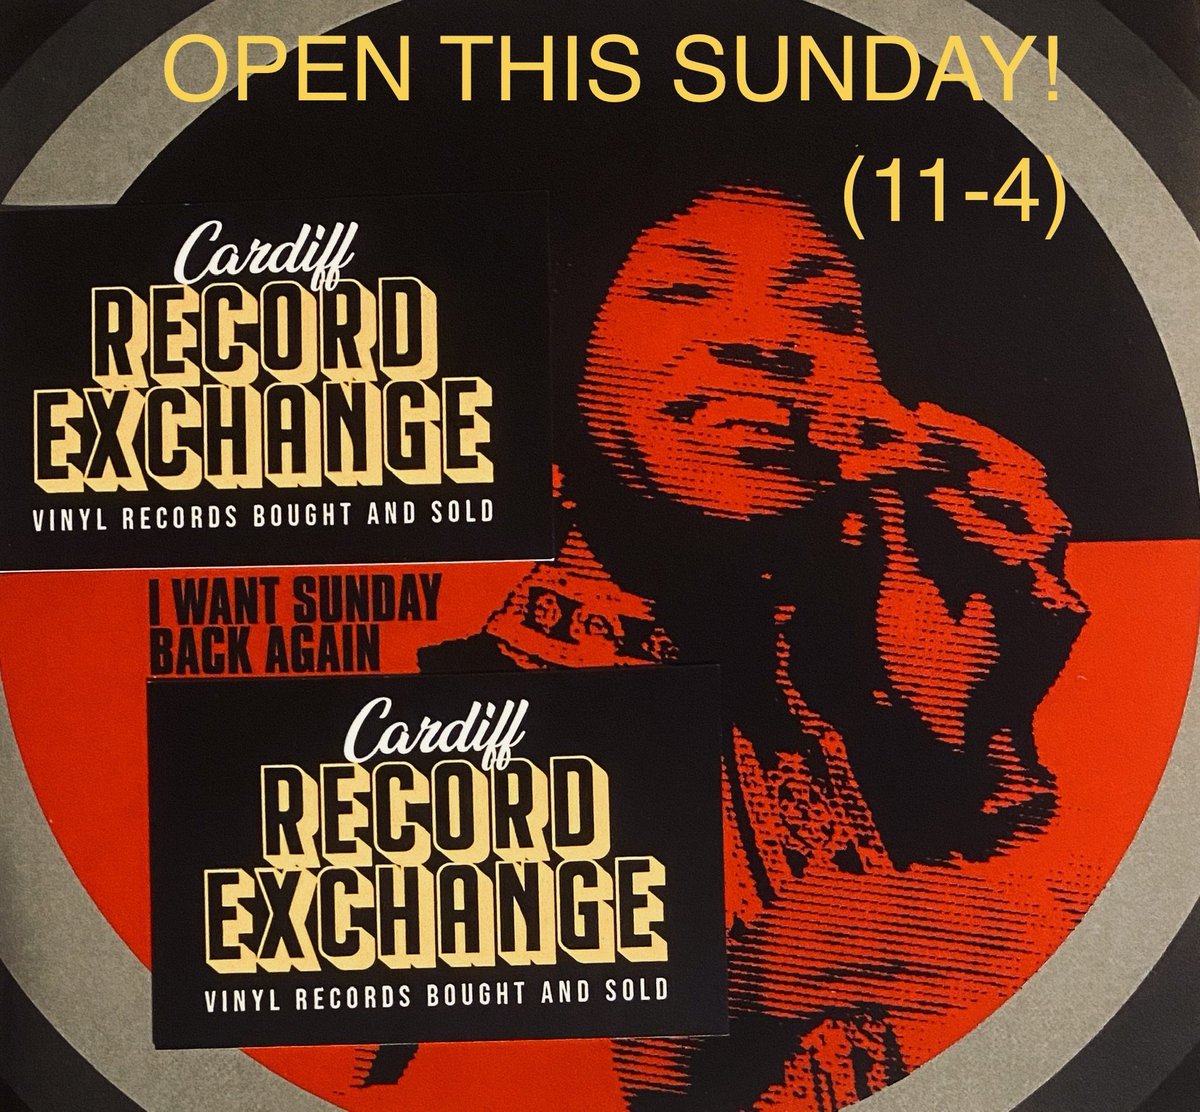 Time for another of those Sunday openings….this Sunday (10th Sept) we will be open, 11-4. 
#opensunday 
#cardiffwales #cardiffmusic #vinyl #cardiffrecordexchange
#albums #lps #vinyllps #singles  #45s #vinylsingles #wales #cymru
#recordsforsale o#recordshopping #rarerecords